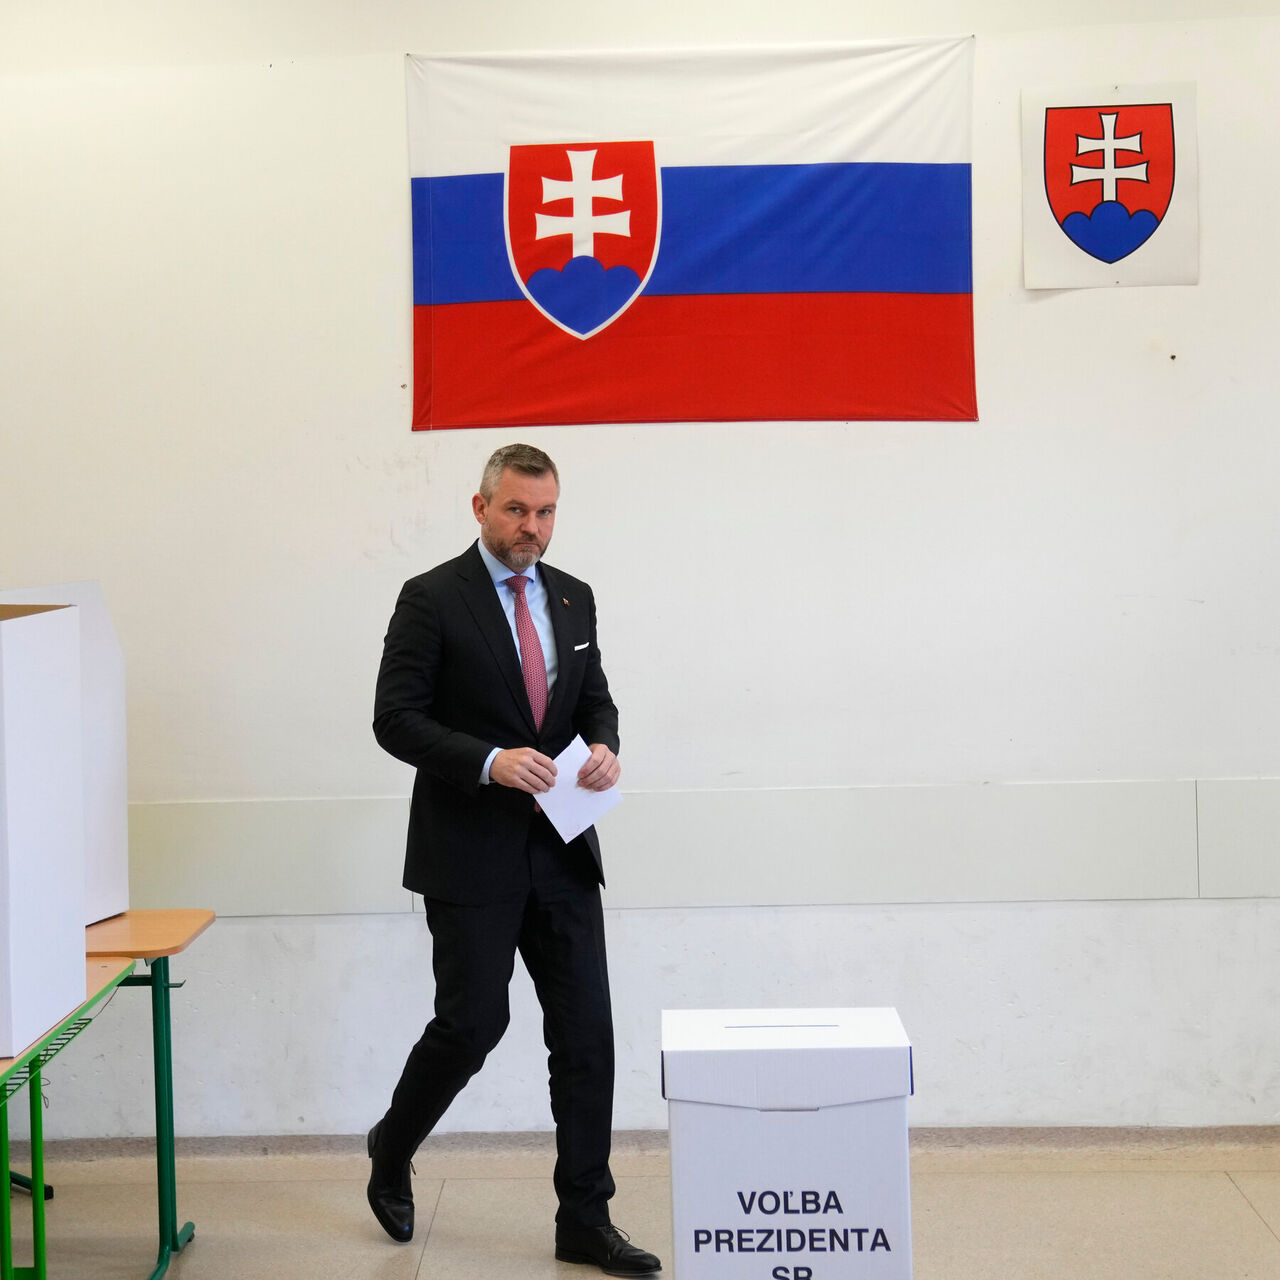 Pro-Russian candidate wins Slovakia presidential race